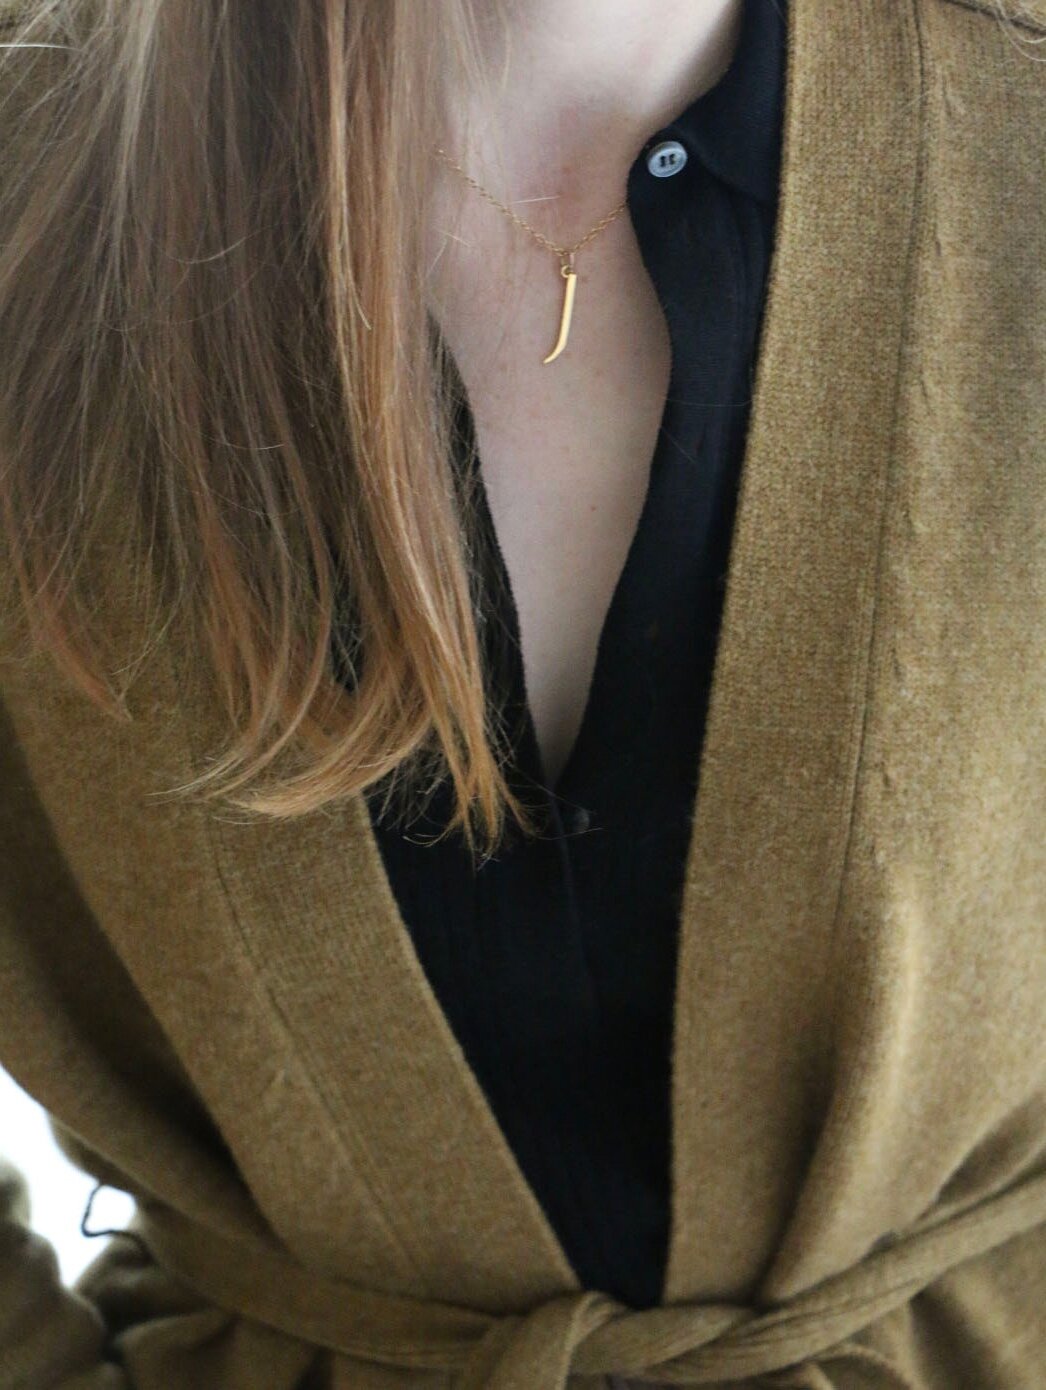 J Initial Necklace worn by model wearing woollen cardigan and black collared top